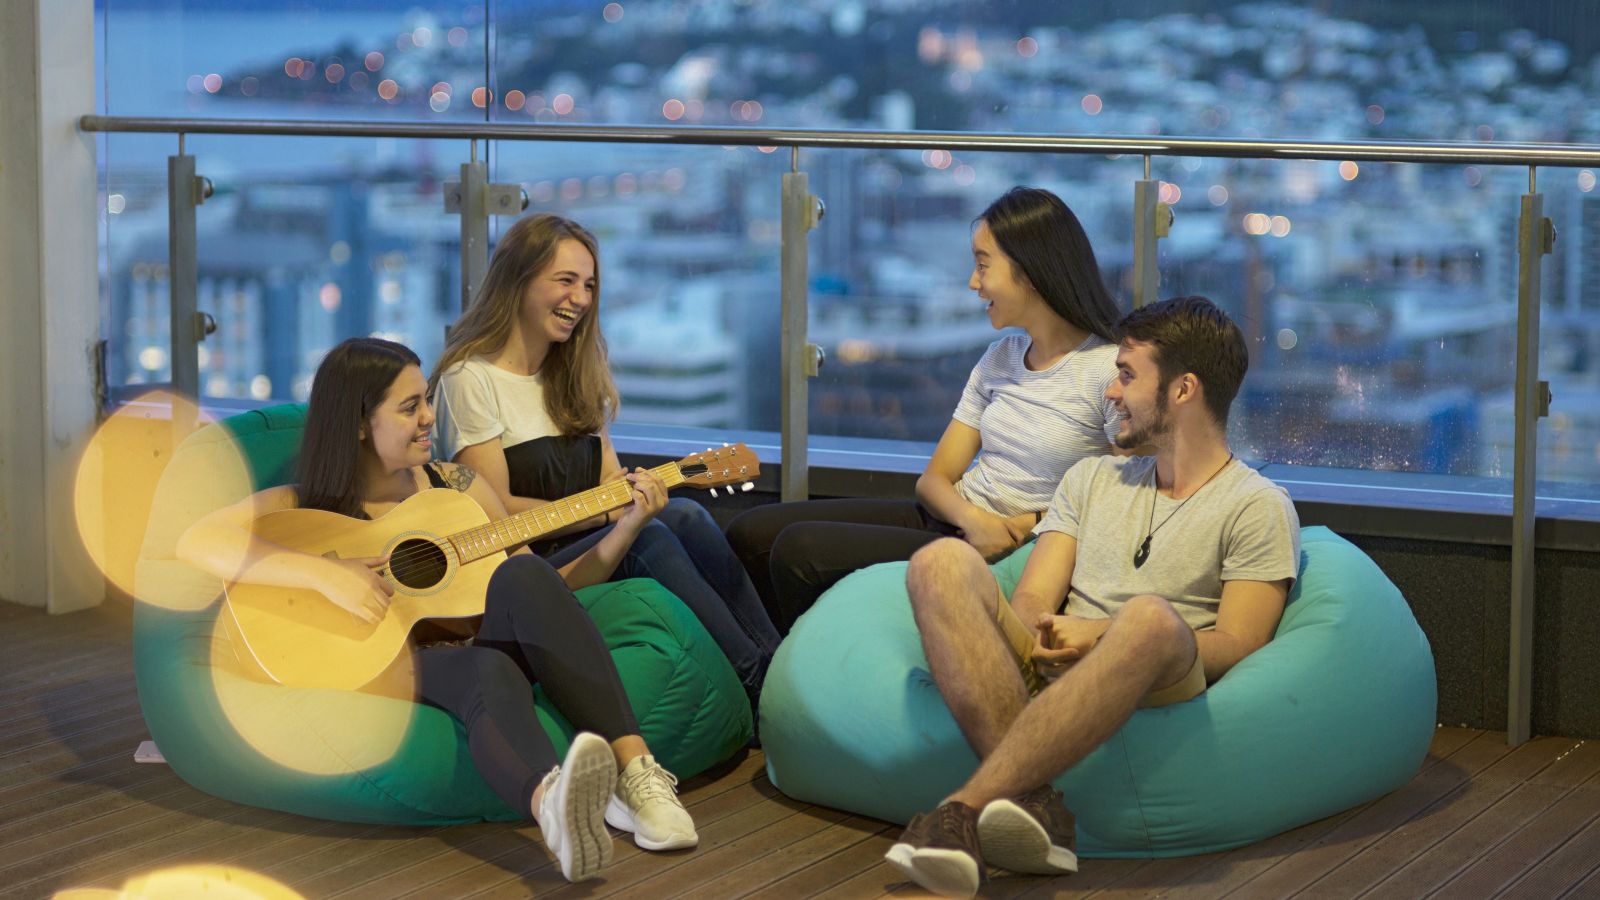 Students sit in beanbag chairs and socialise together – one plays a guitar.